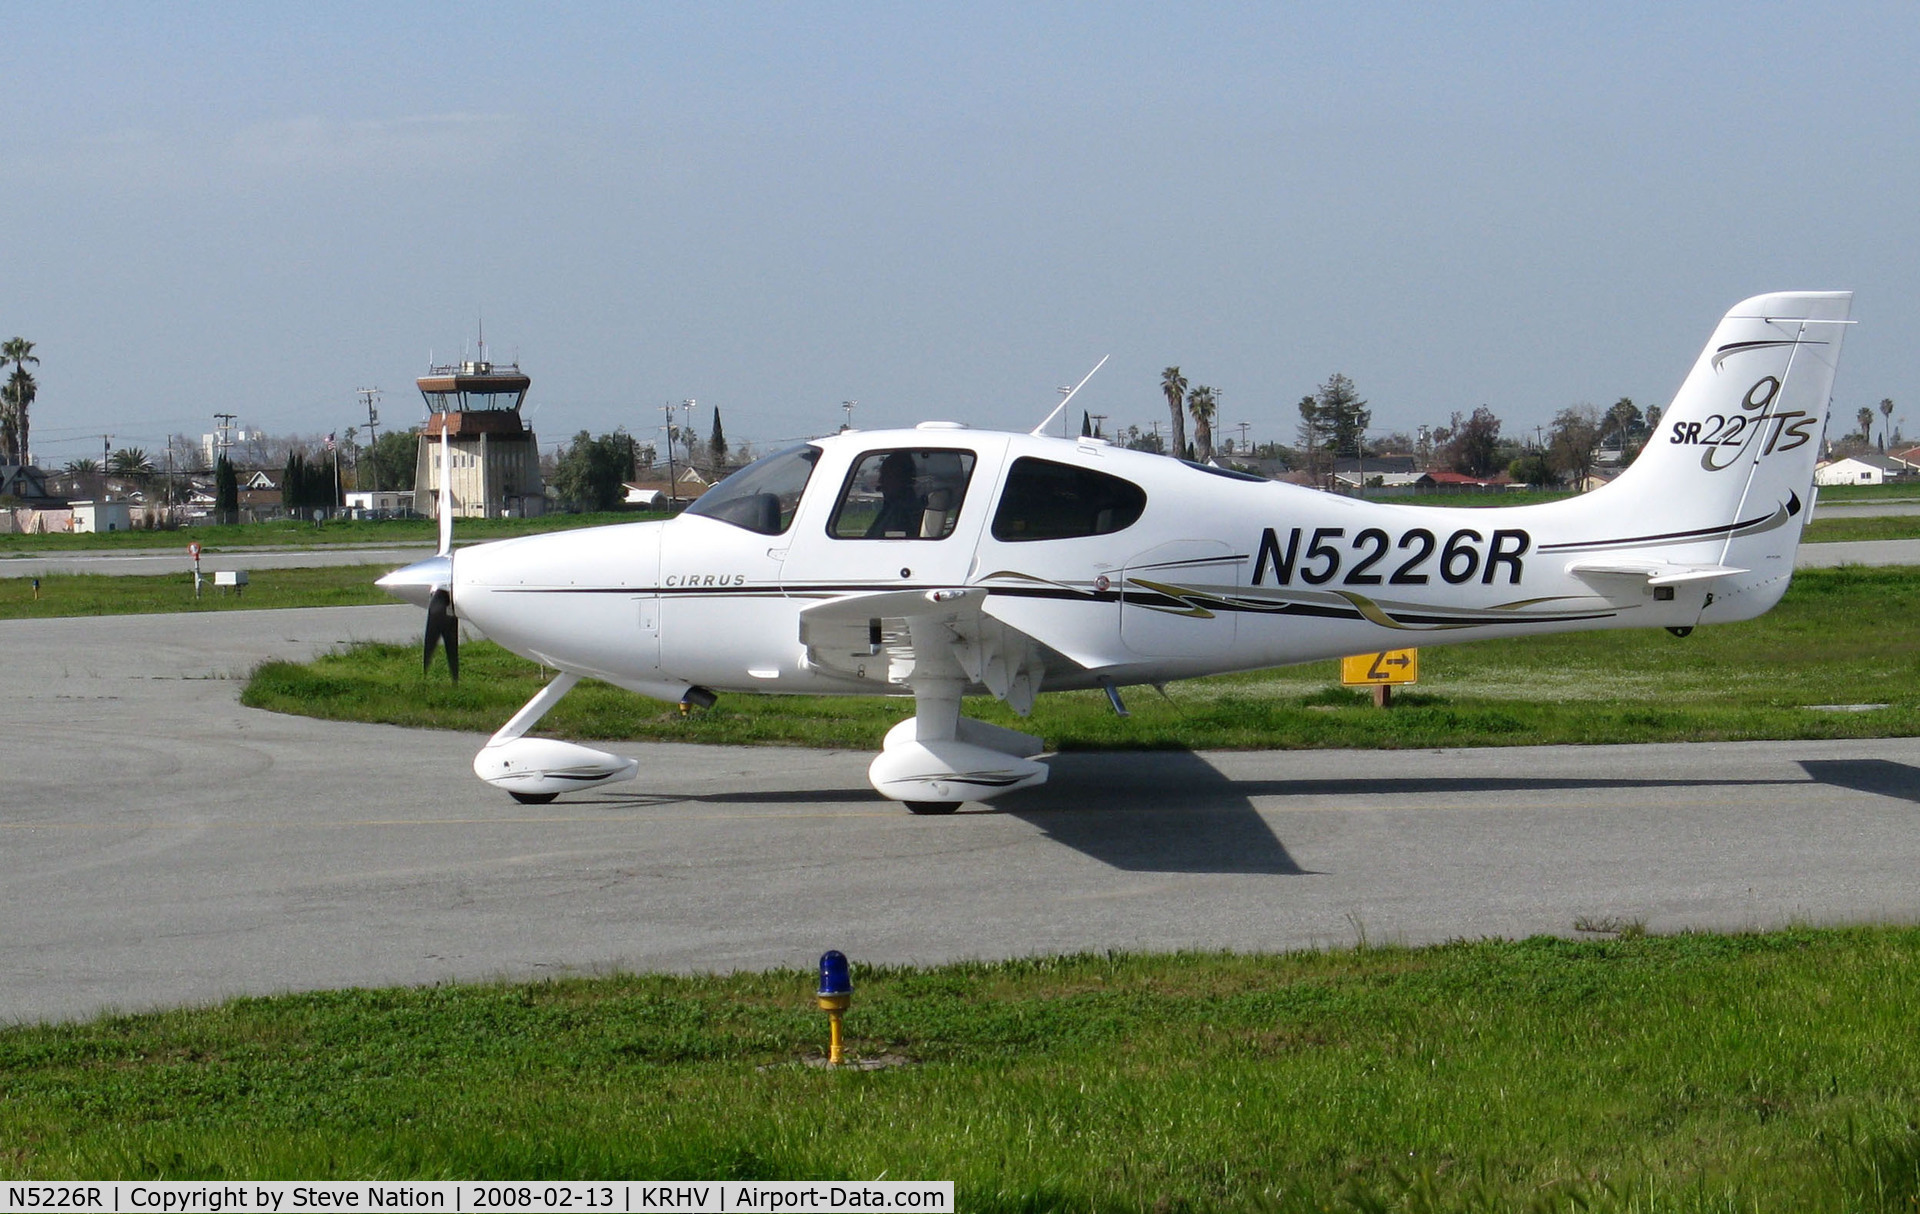 N5226R, 2006 Cirrus SR22 GTS C/N 1767, Locally-Based 2006 Cirrus SR22 taxing to hold area @ Reid-Hillview Airport San Jose, CA